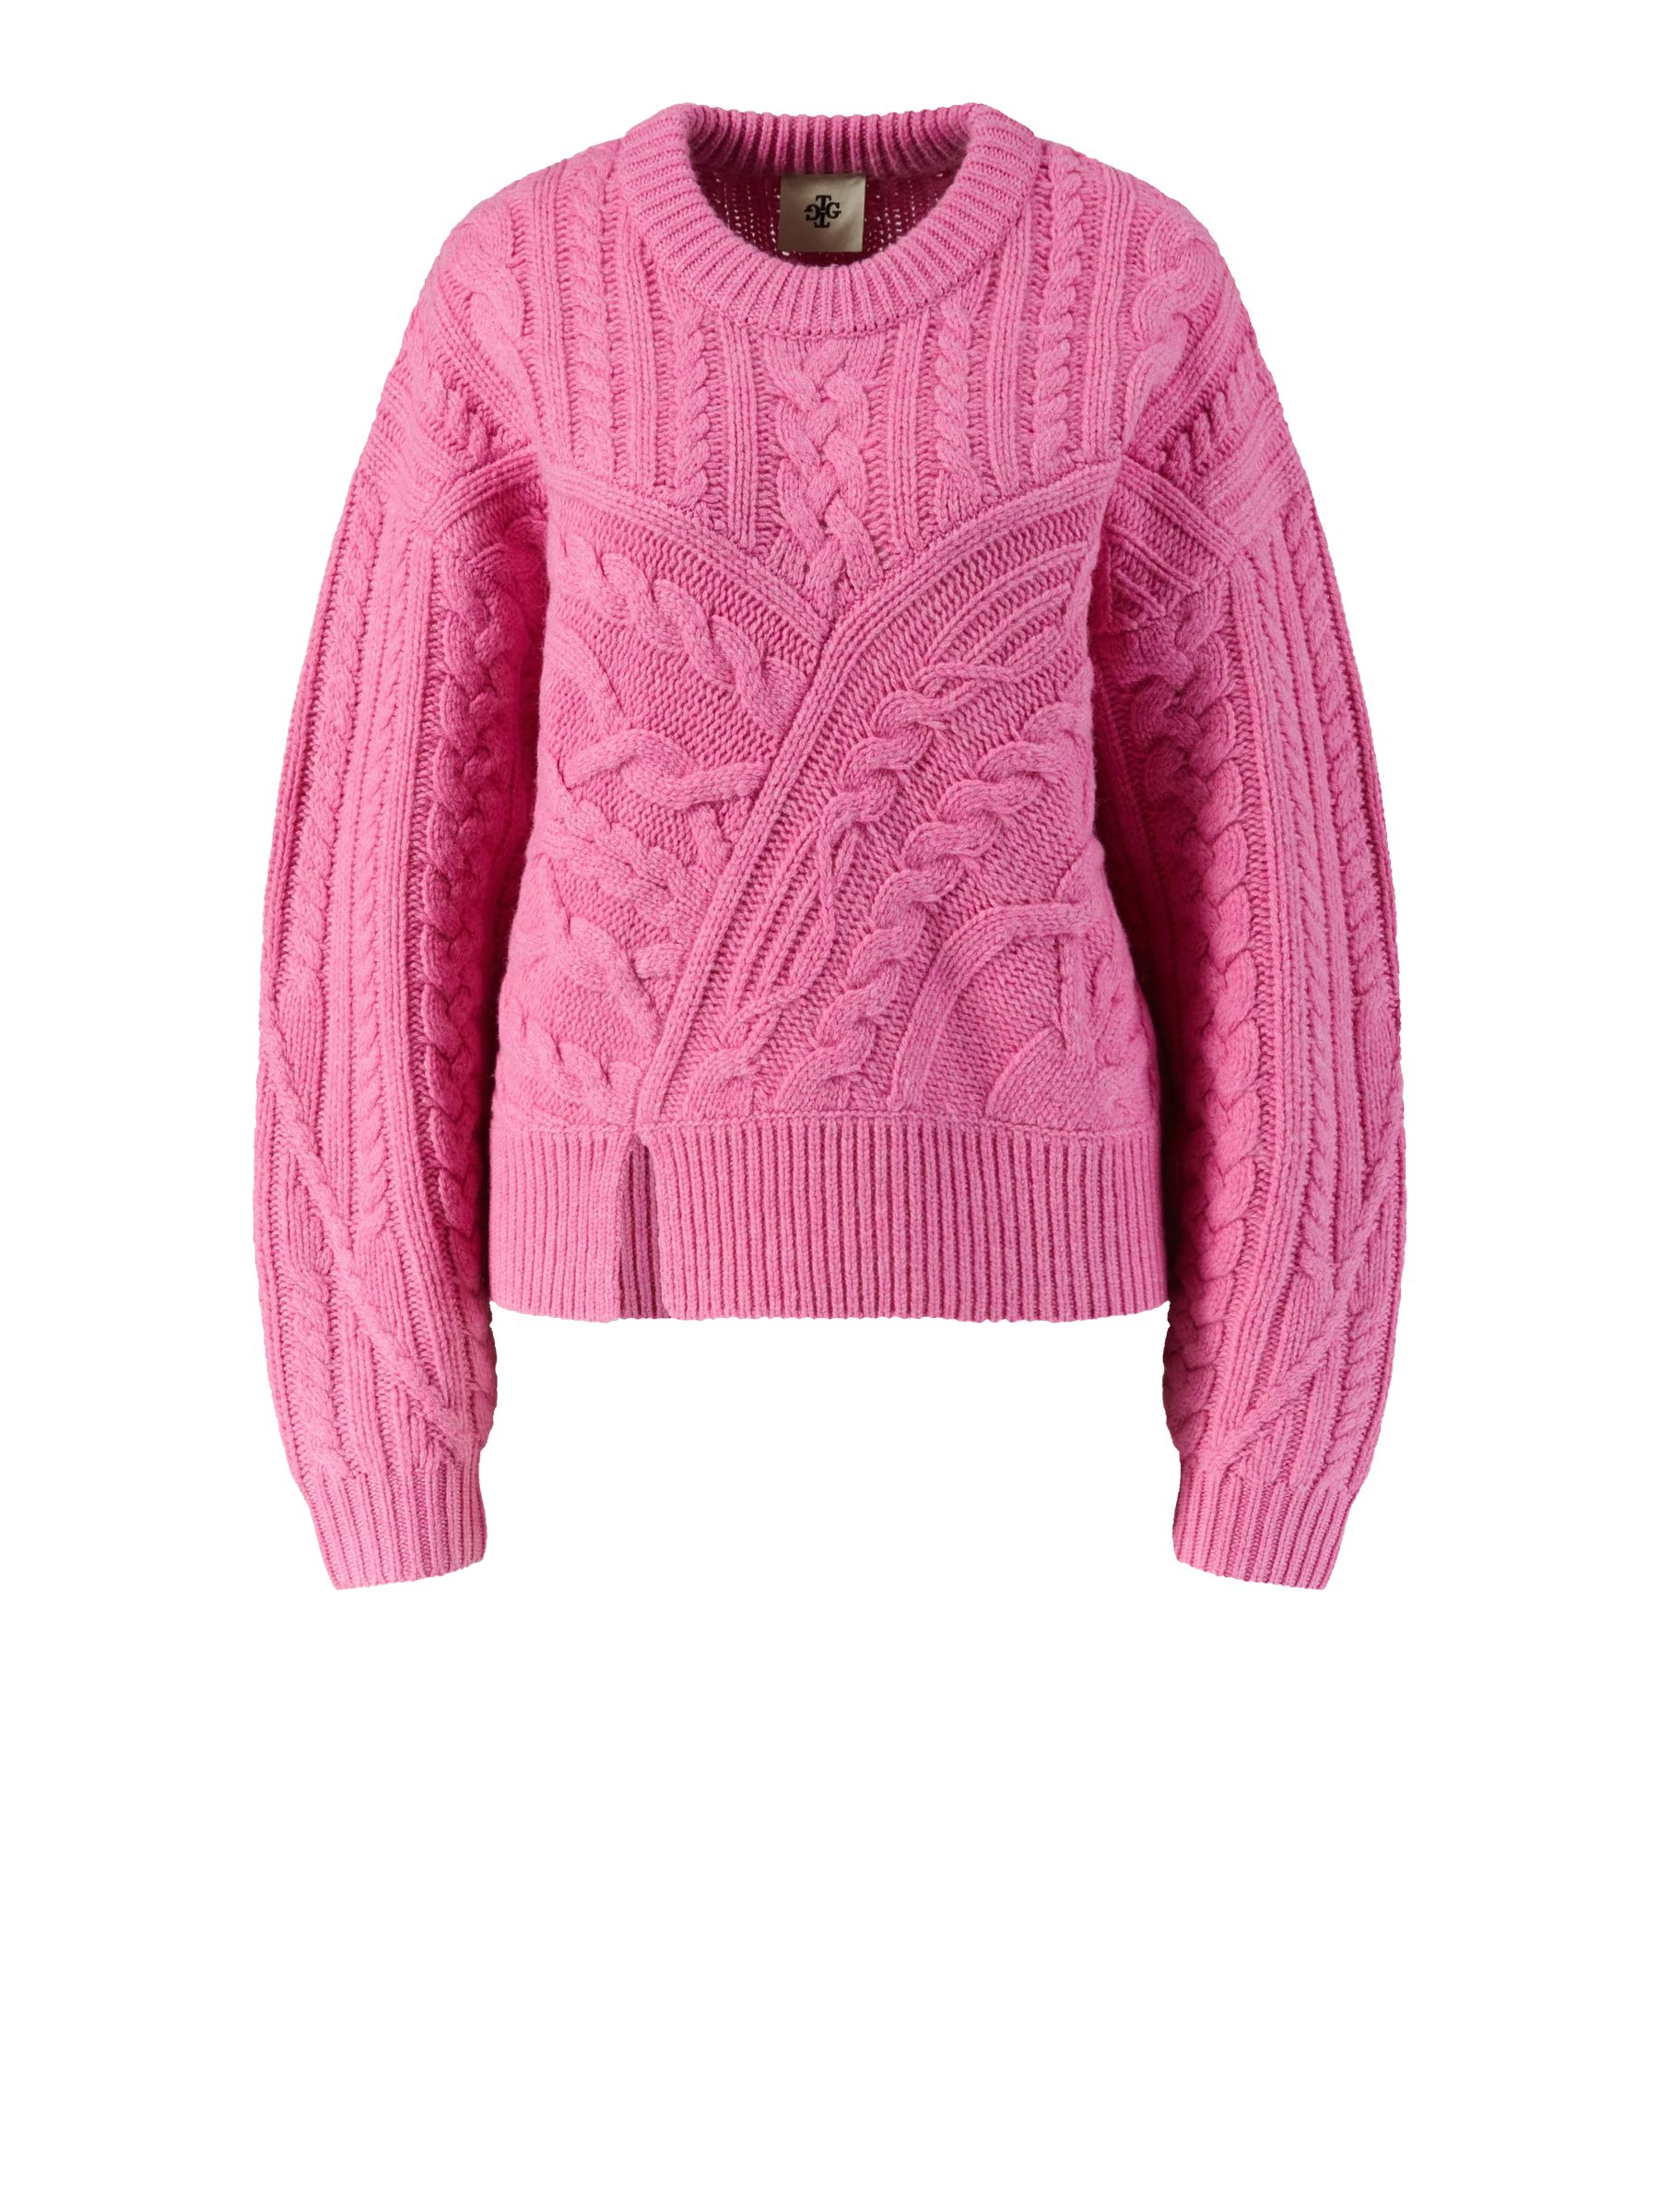 Wool sweater 'Canada' Pink | Unger-Fashion.com